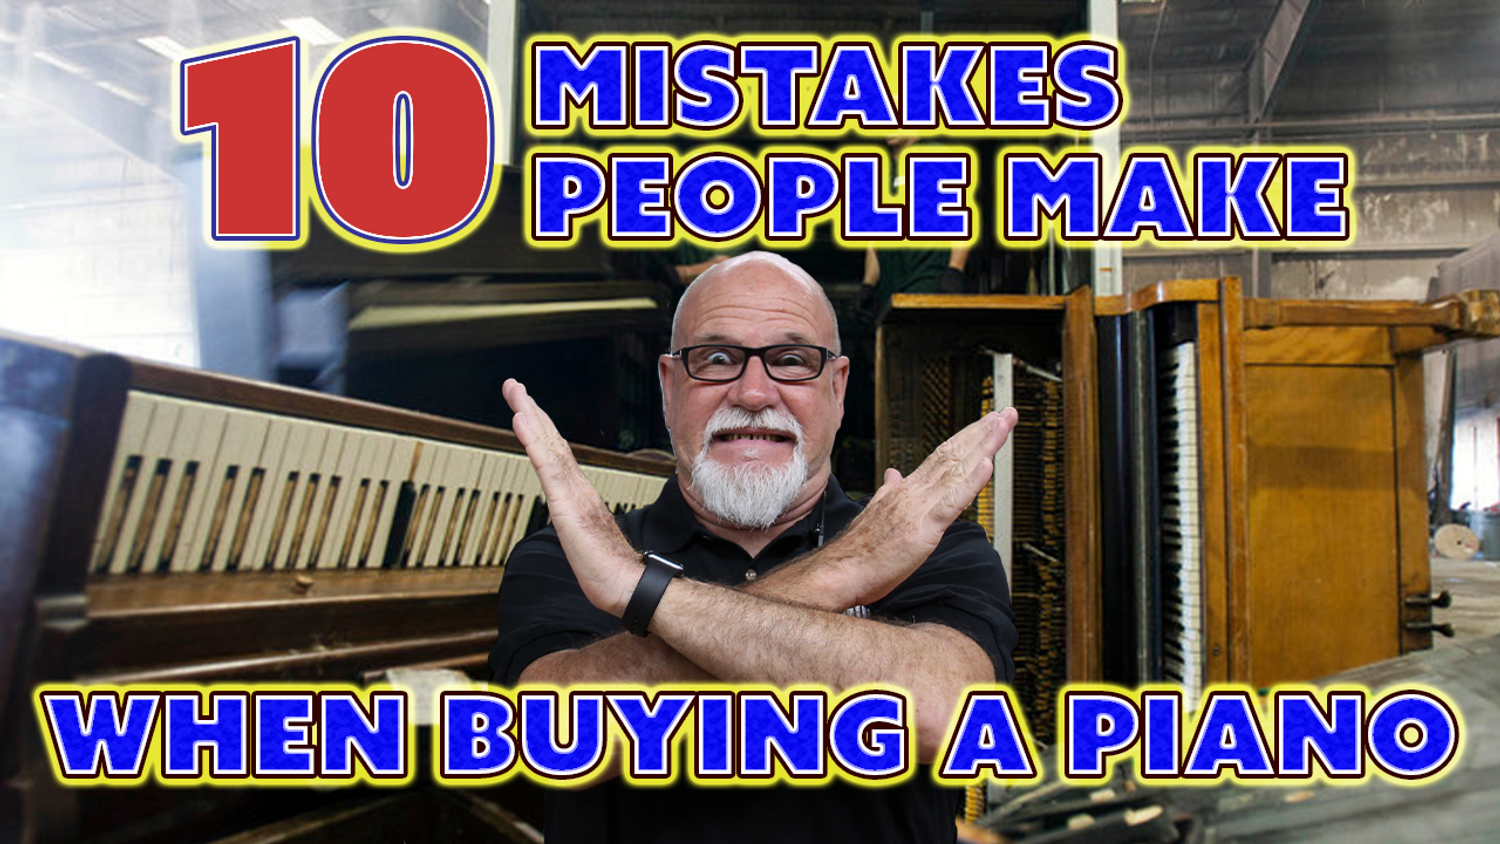 The Top 10 Mistakes People Make When Buying A Piano